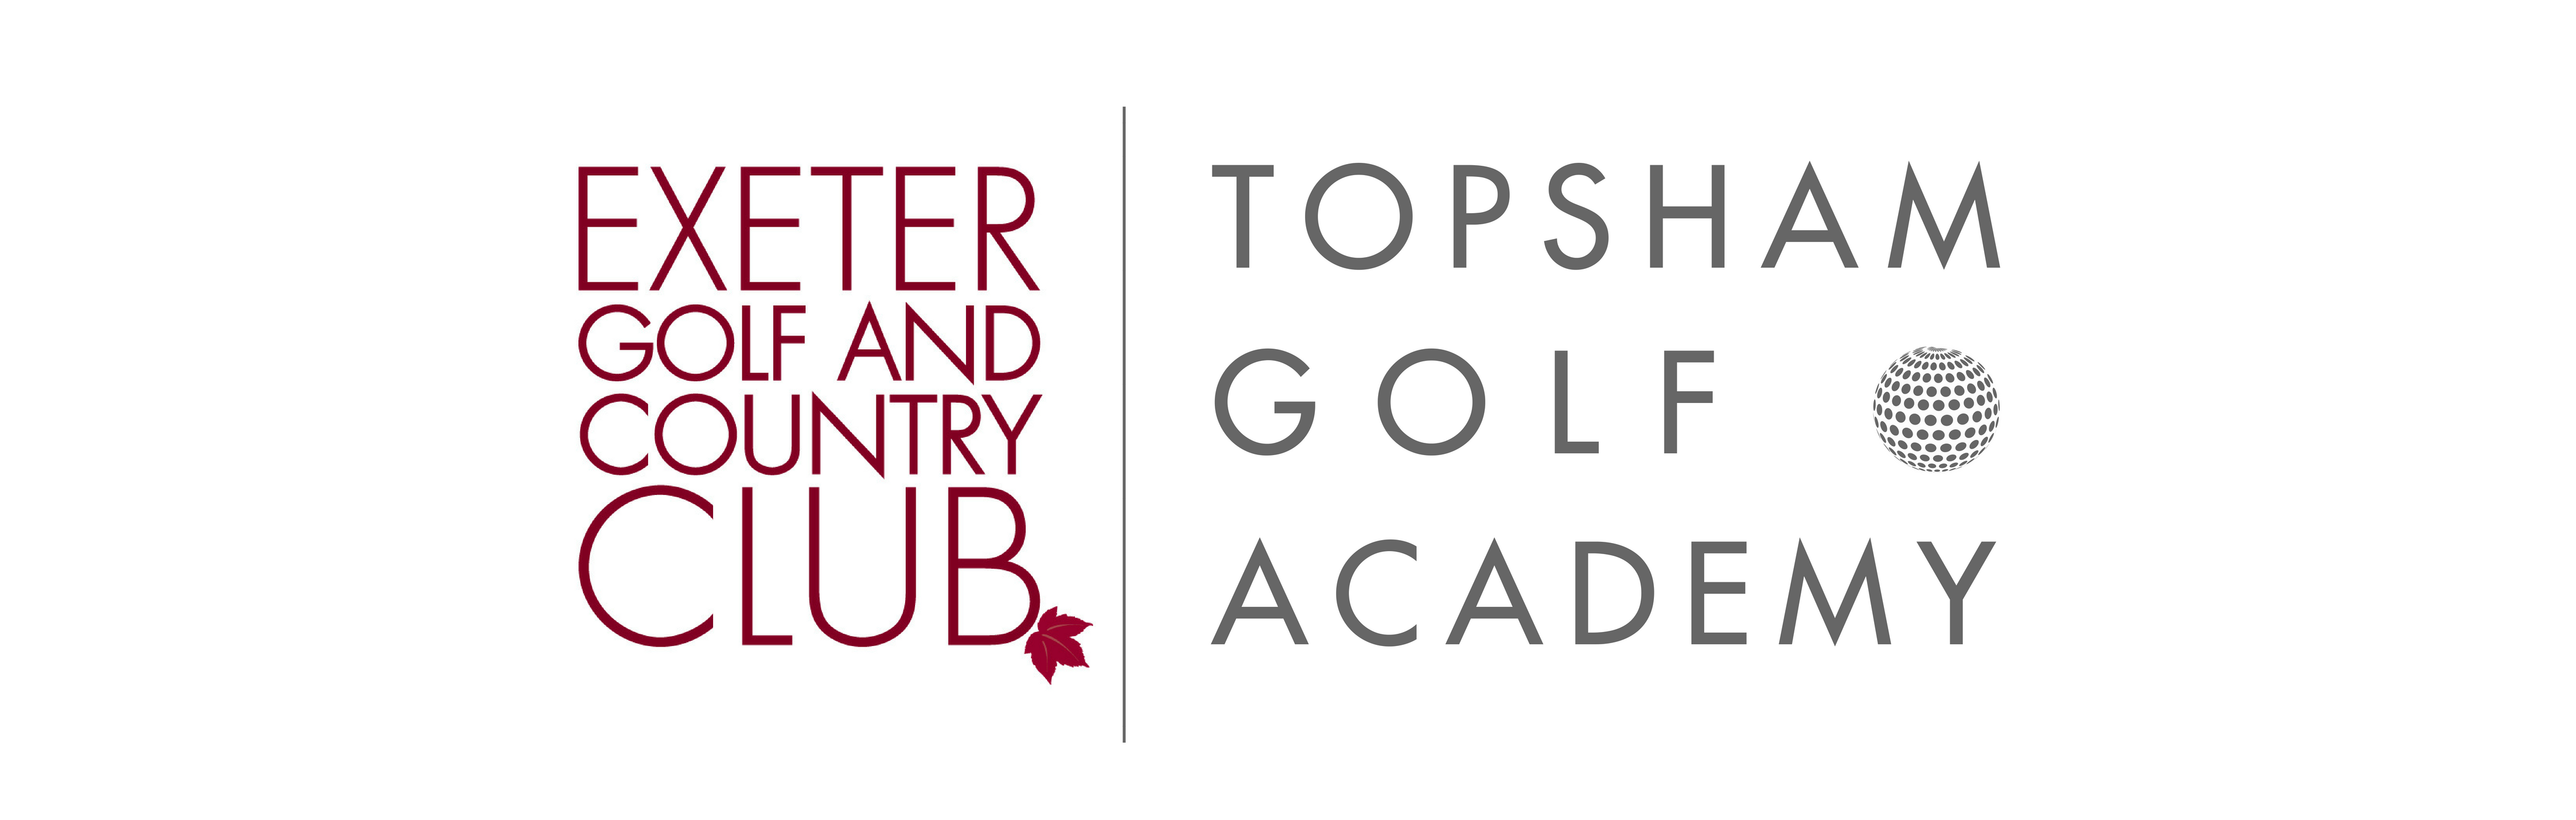 topsham golf academy driving range exeter golf and country club